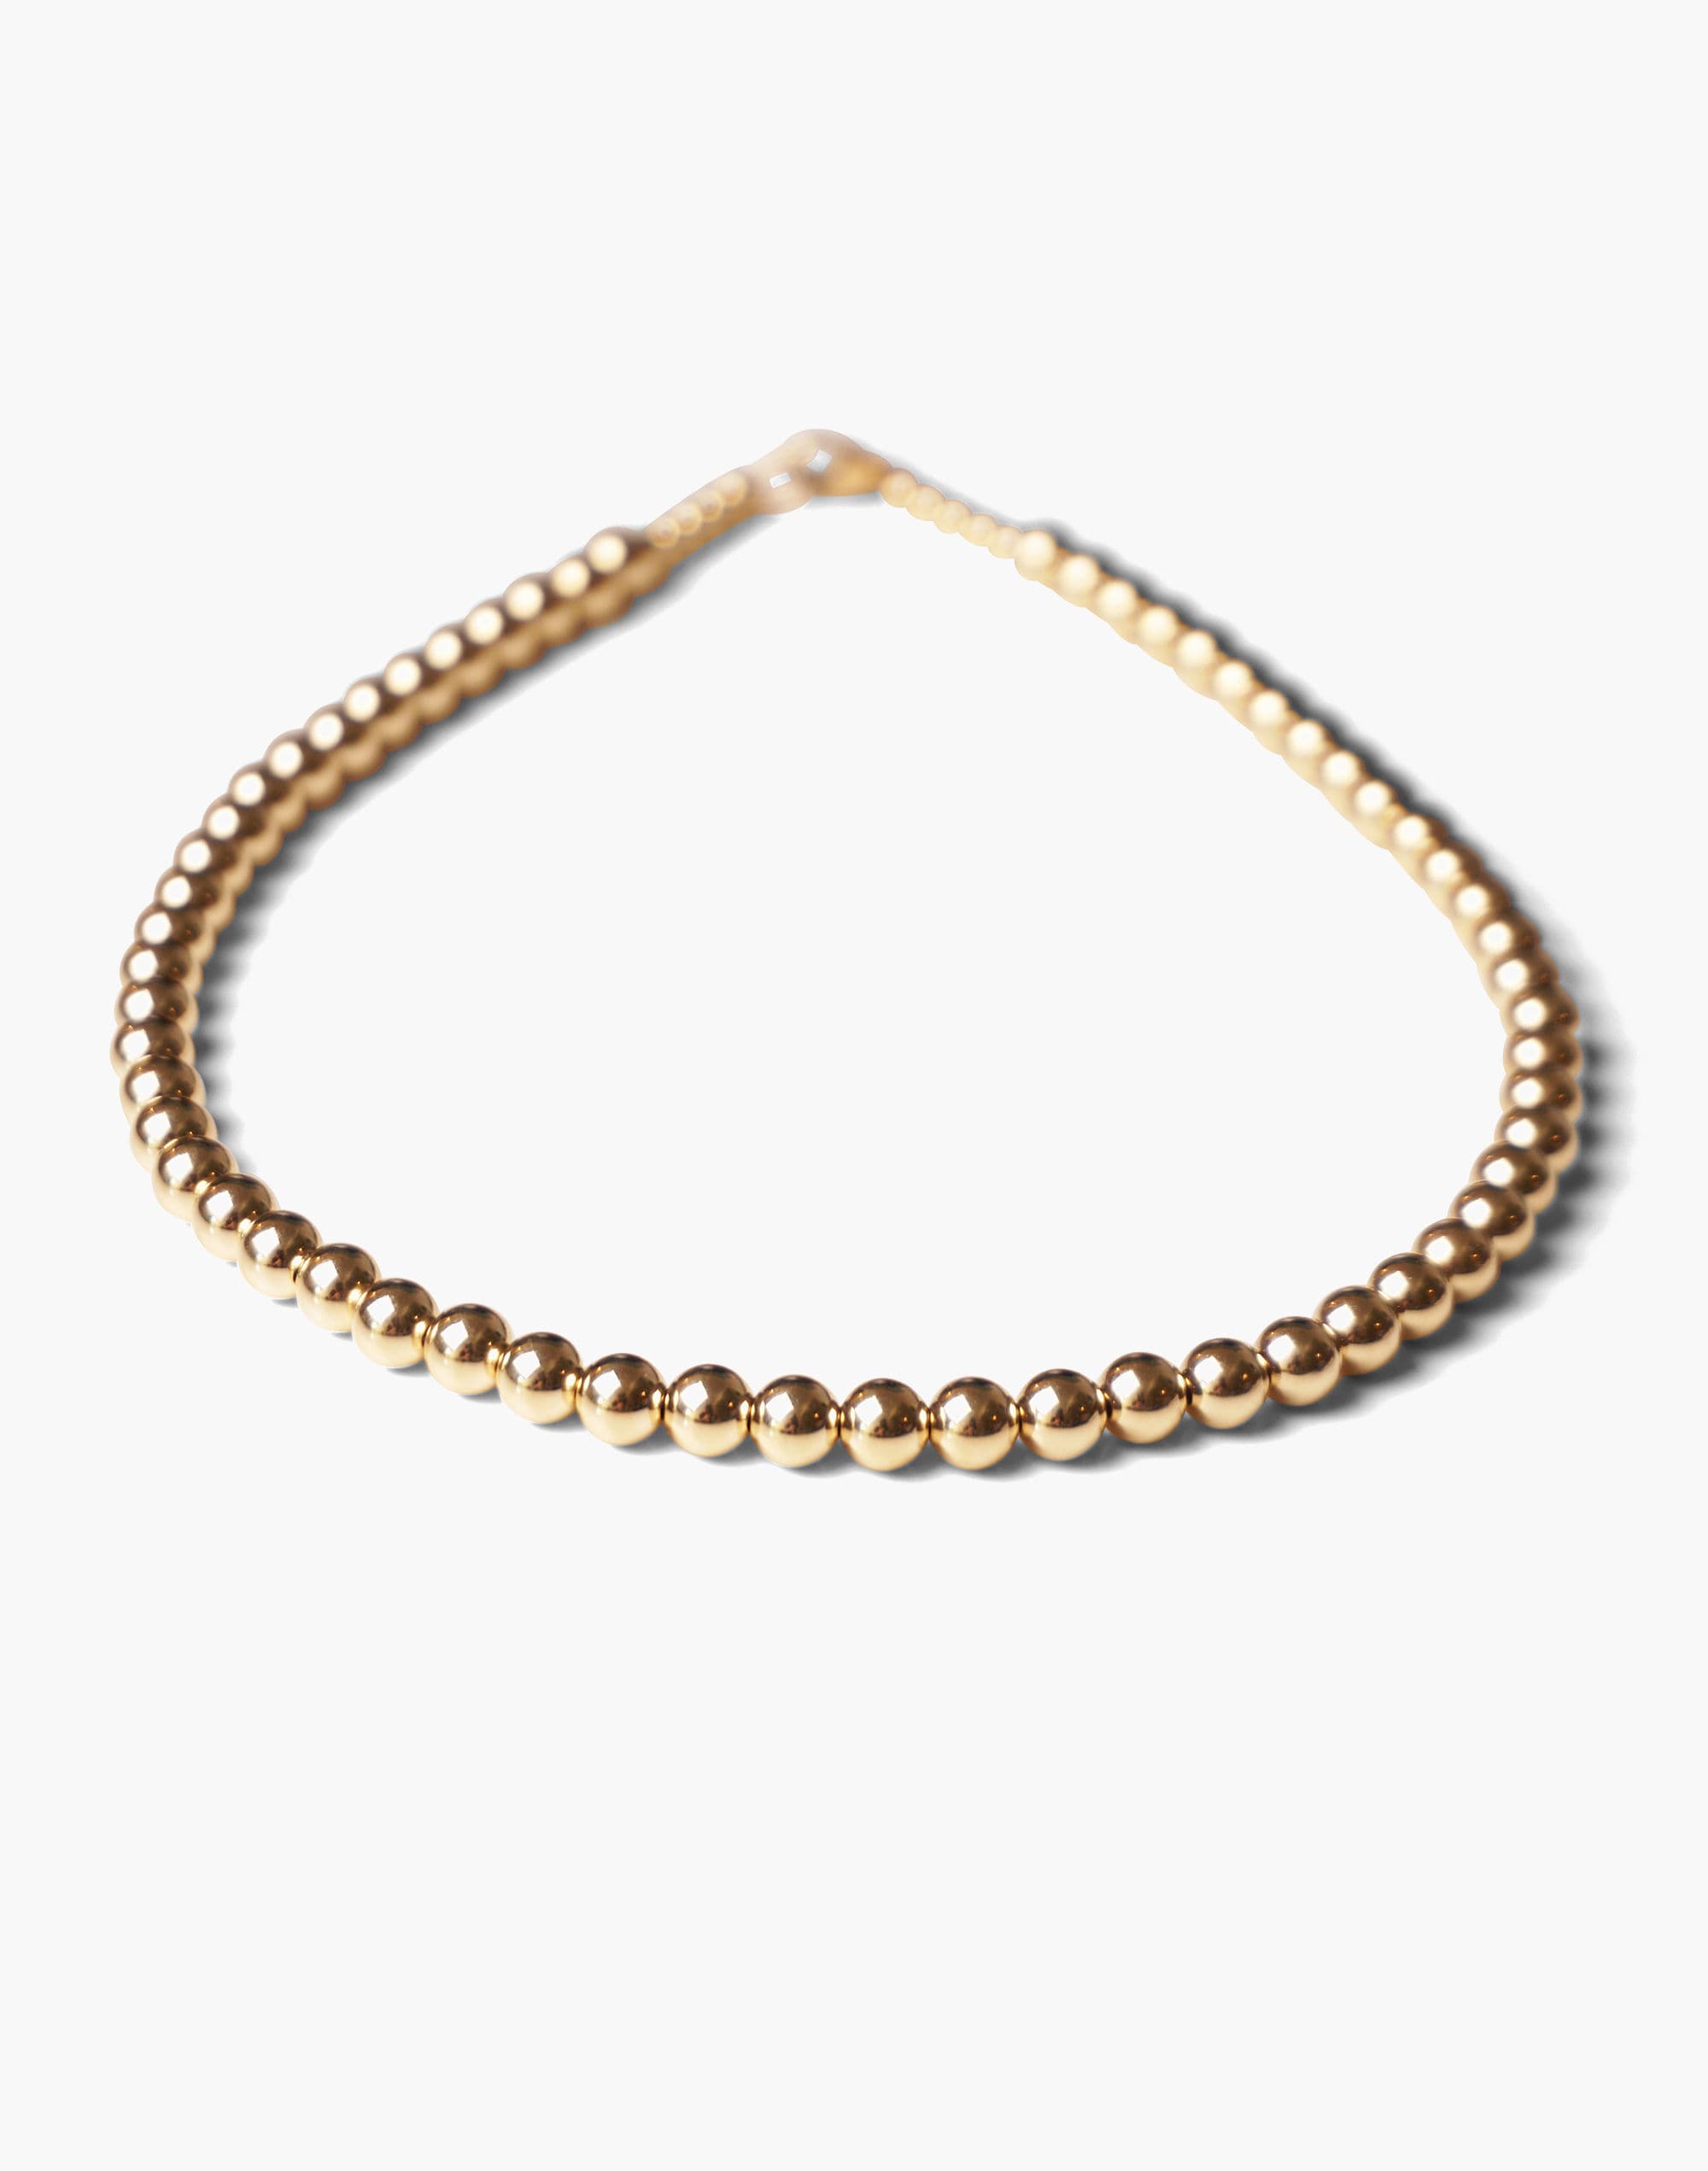 Charlotte Cauwe Studio Bead Necklace in Gold | Madewell